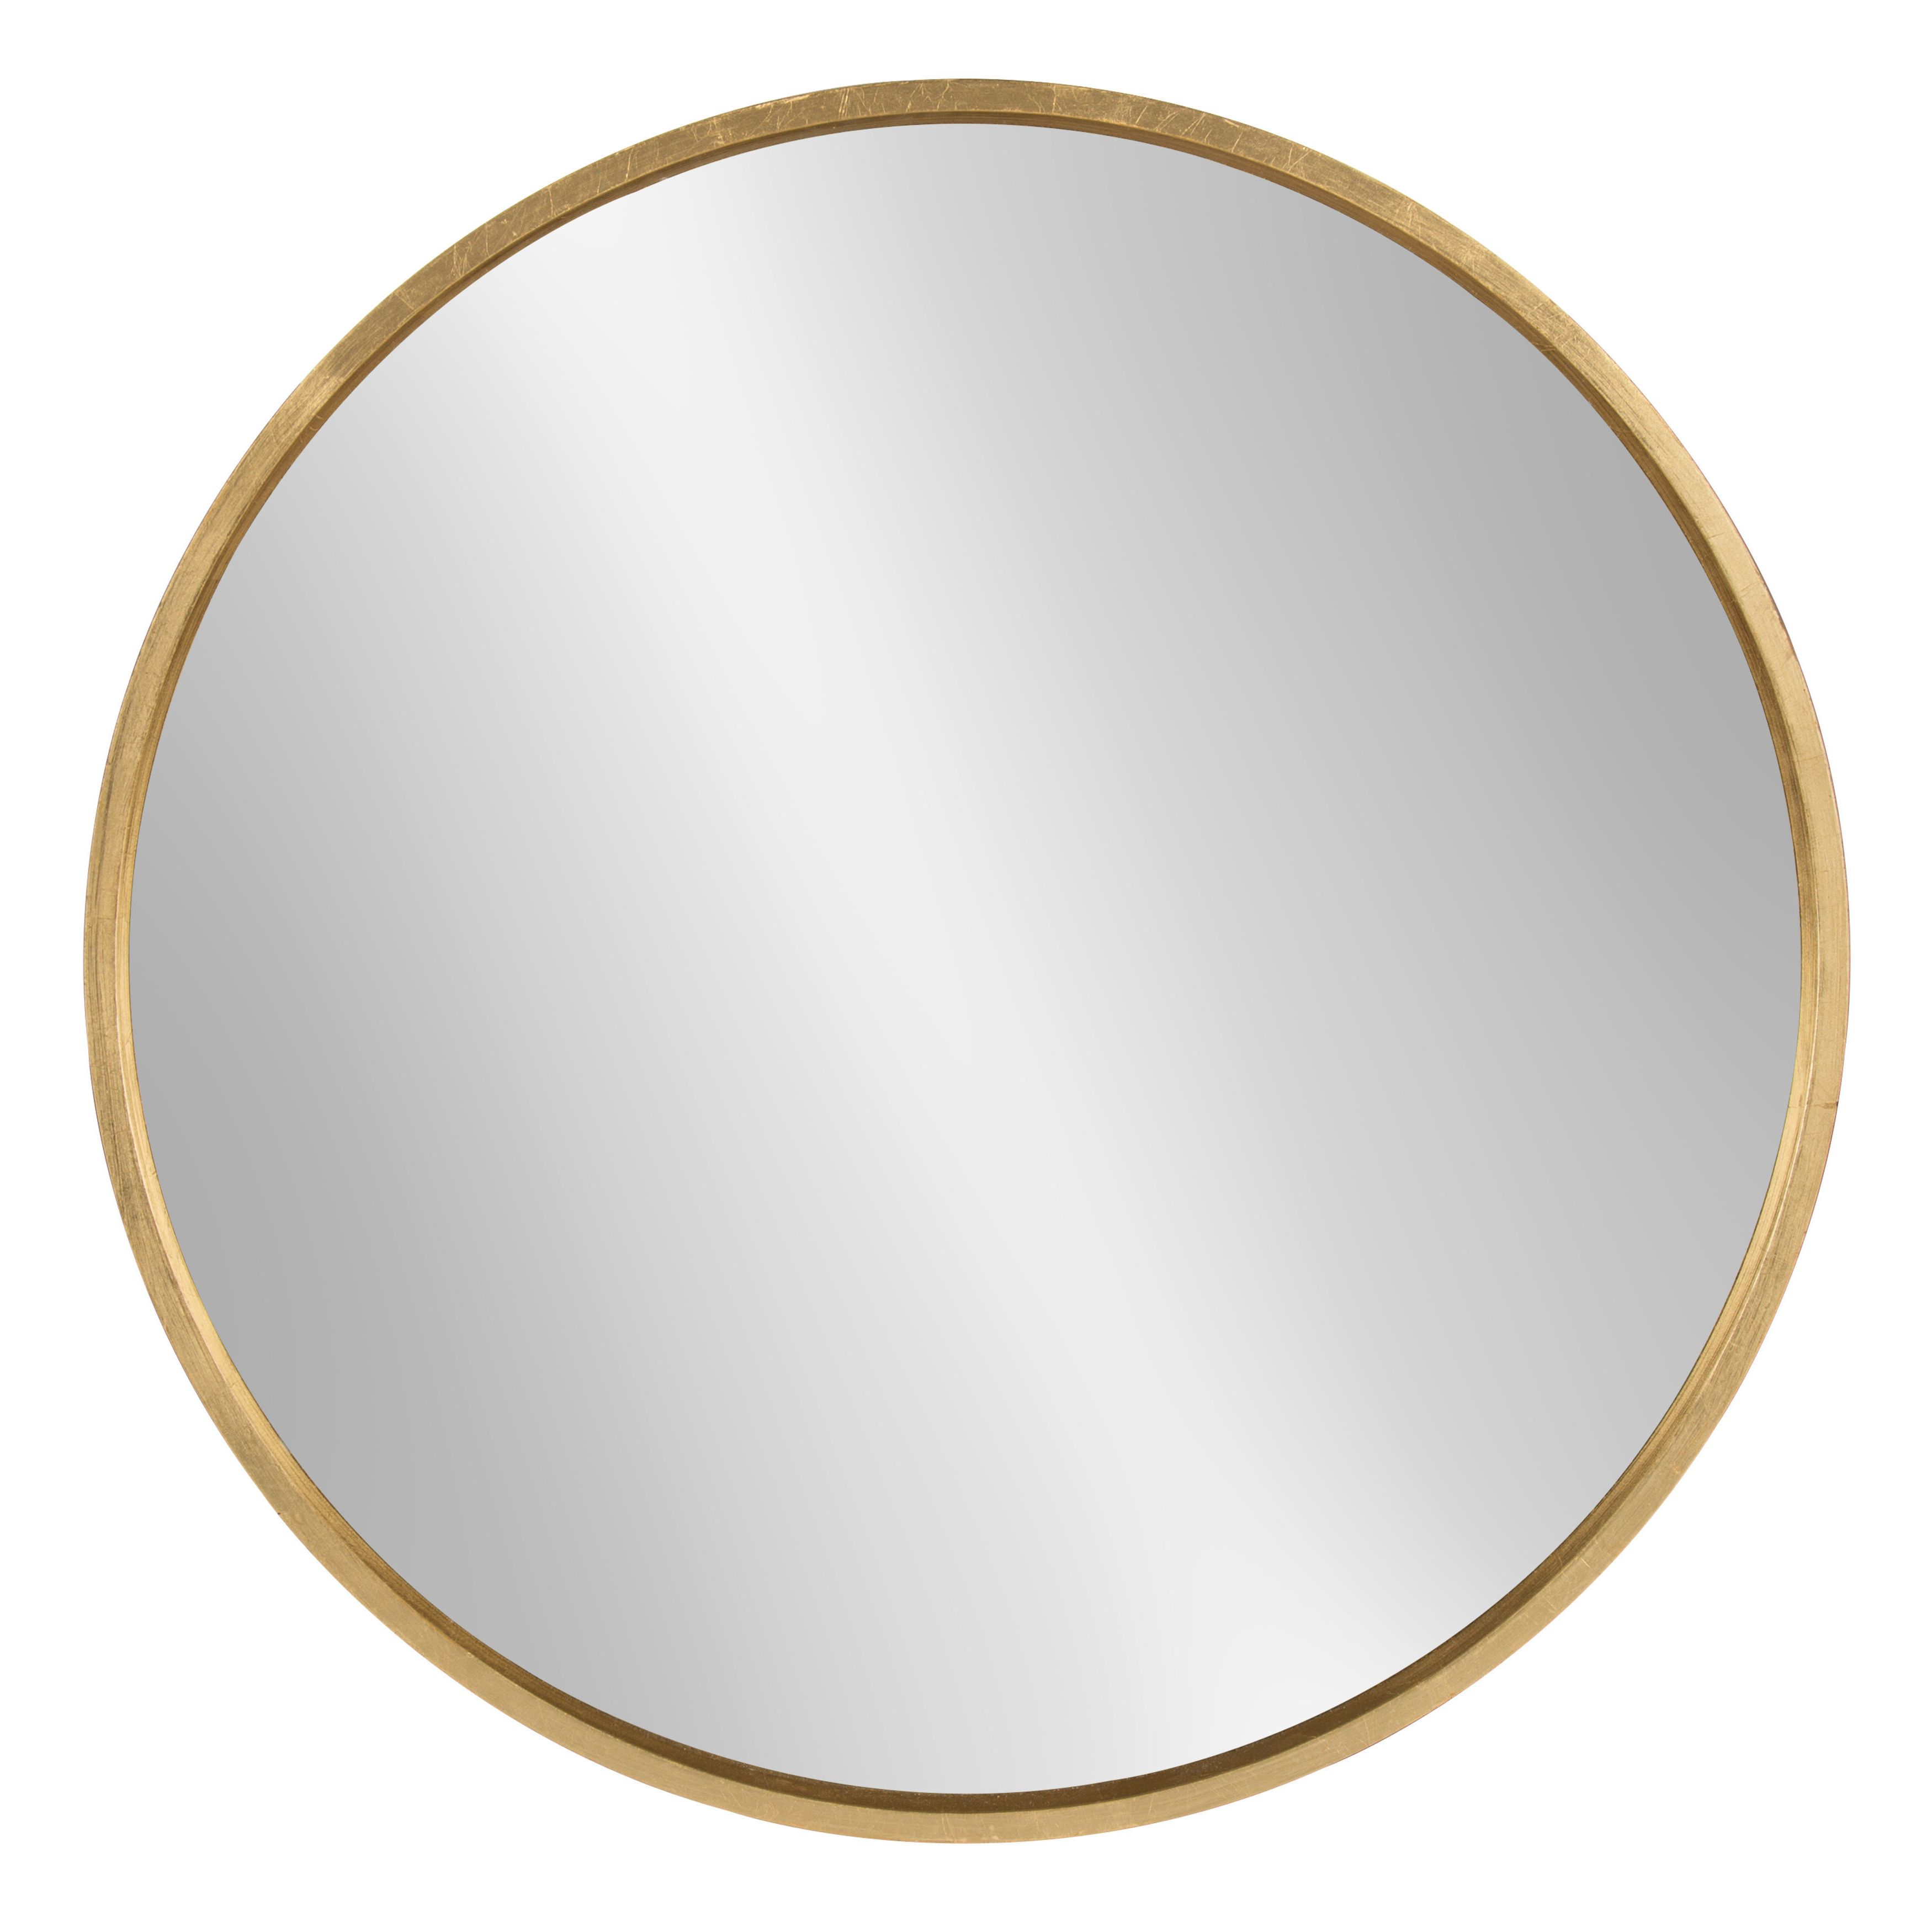 Tanner Accent Mirror Pertaining To Current Gaunts Earthcott Wall Mirrors (View 8 of 20)